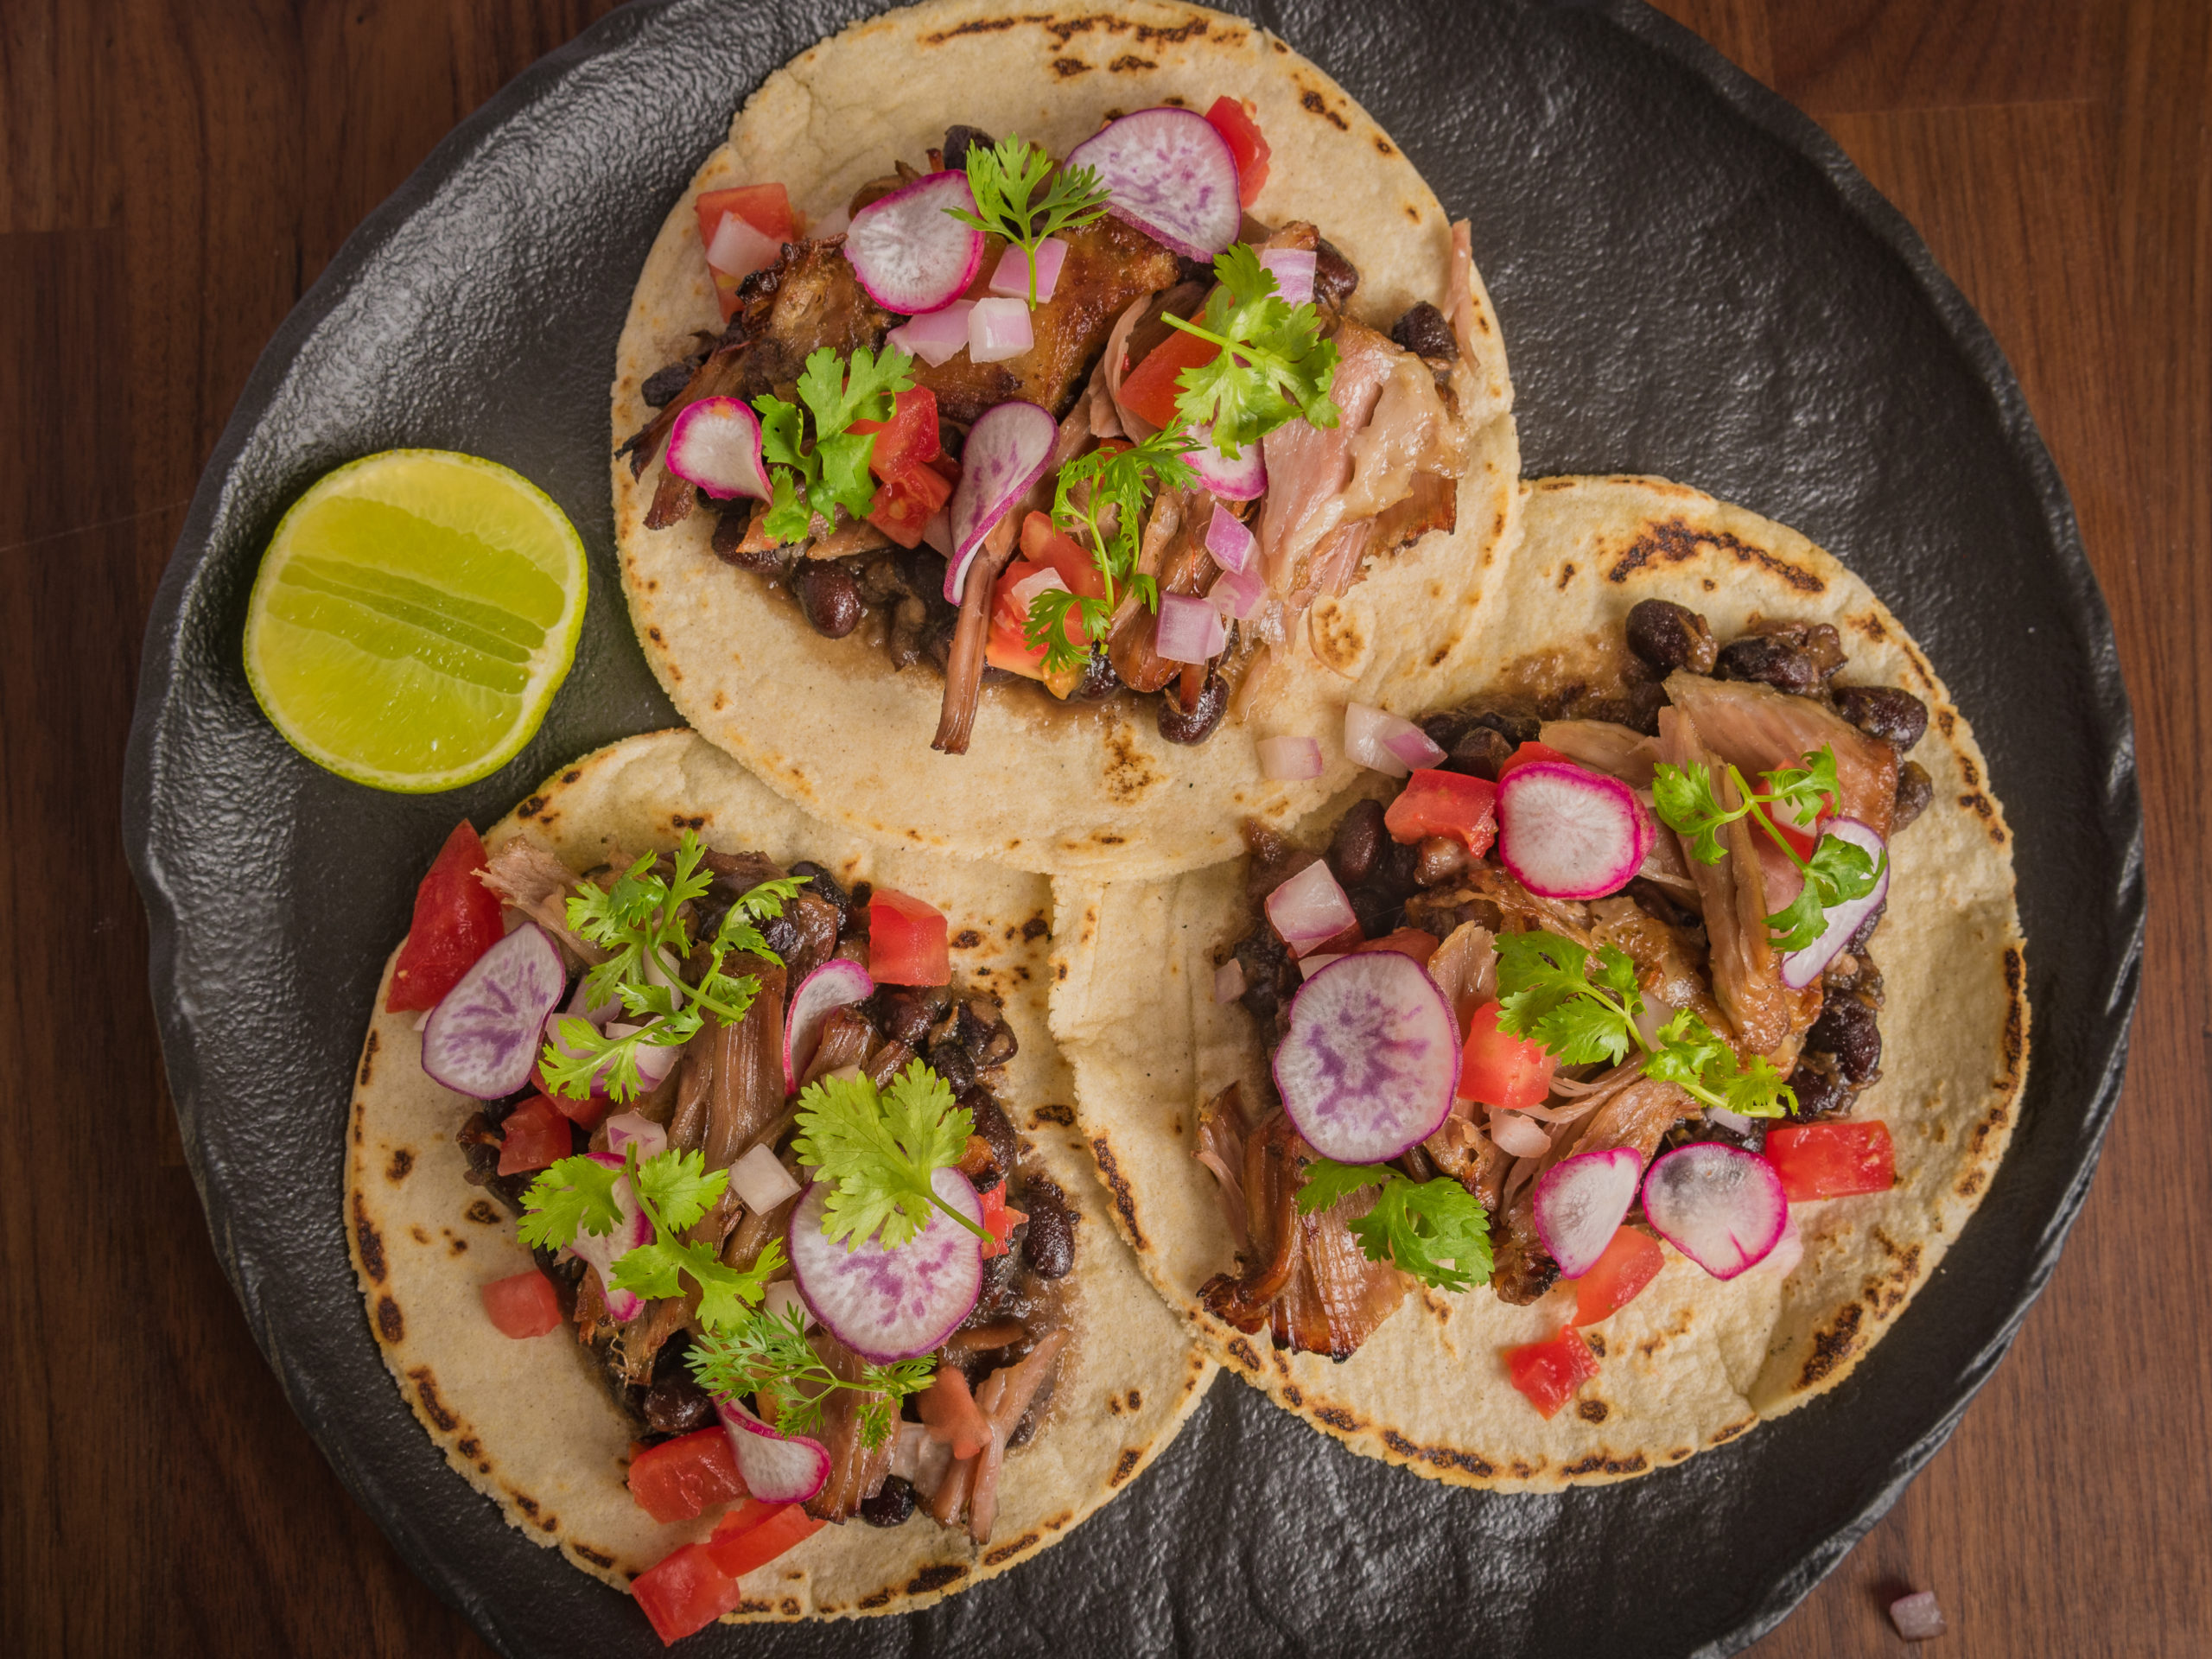 Carnitas tacos with refried beans, tomato, onion, coriander